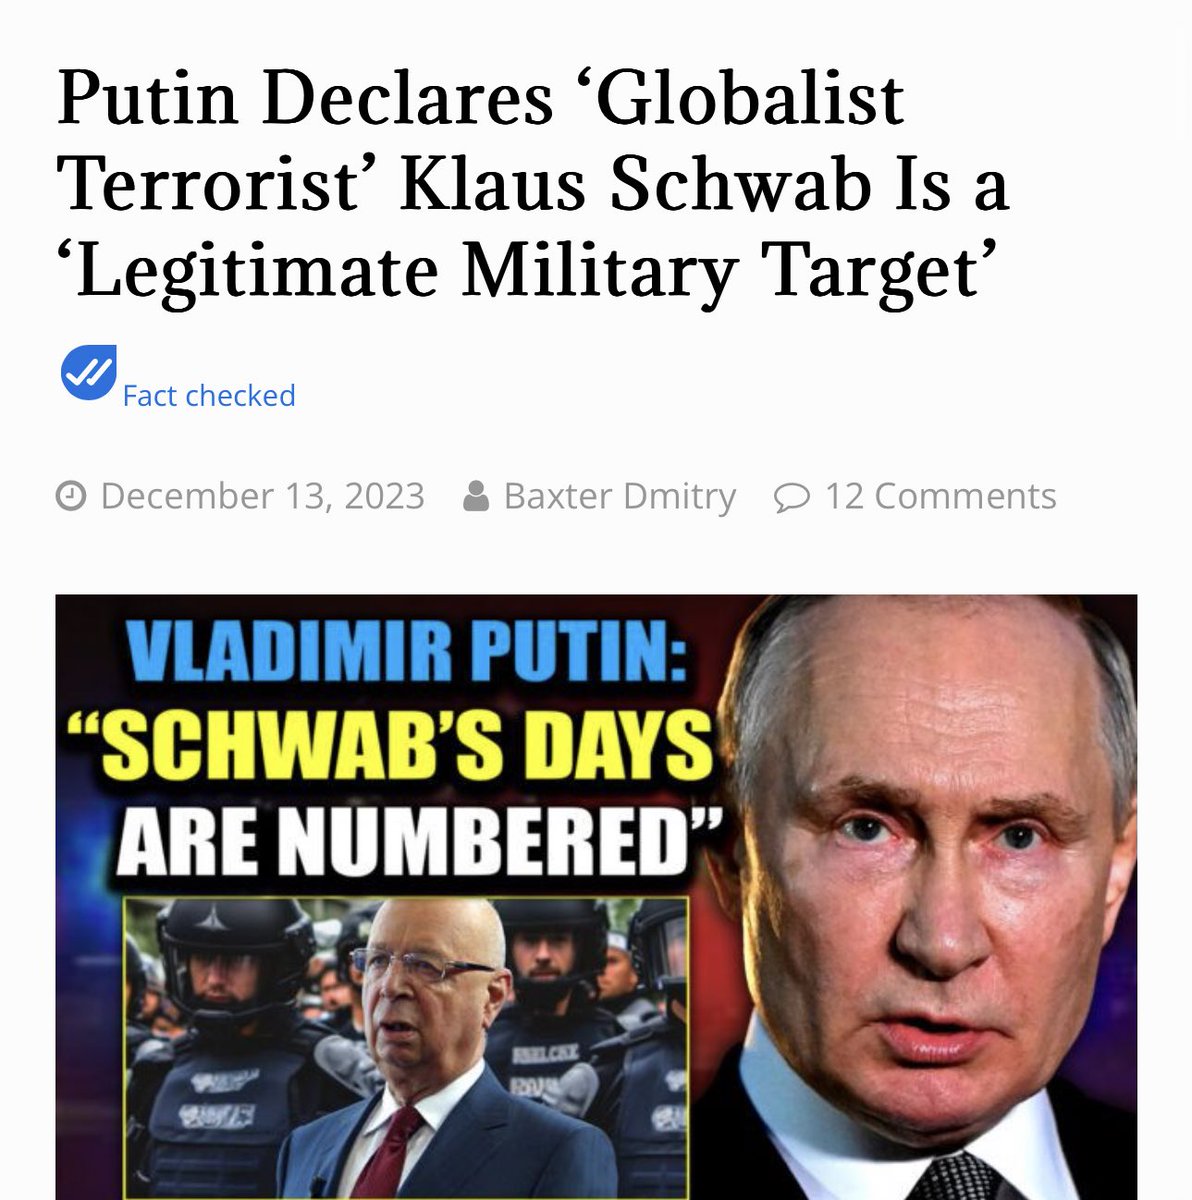 World Economic Forum co-founder Klaus Schwab is a global terrorist who must be held to account, according to Russian President Vladimir Putin. Do you support President Putin?🇷🇺